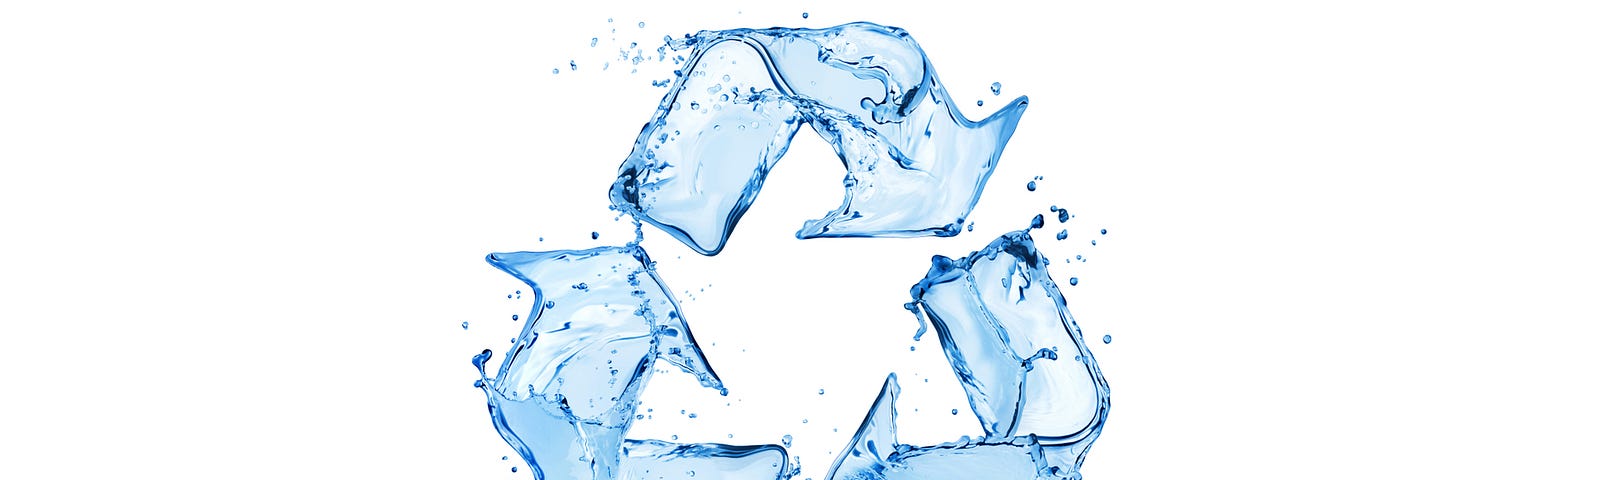 Recycling icon consisting of three arrows made of water splashes.